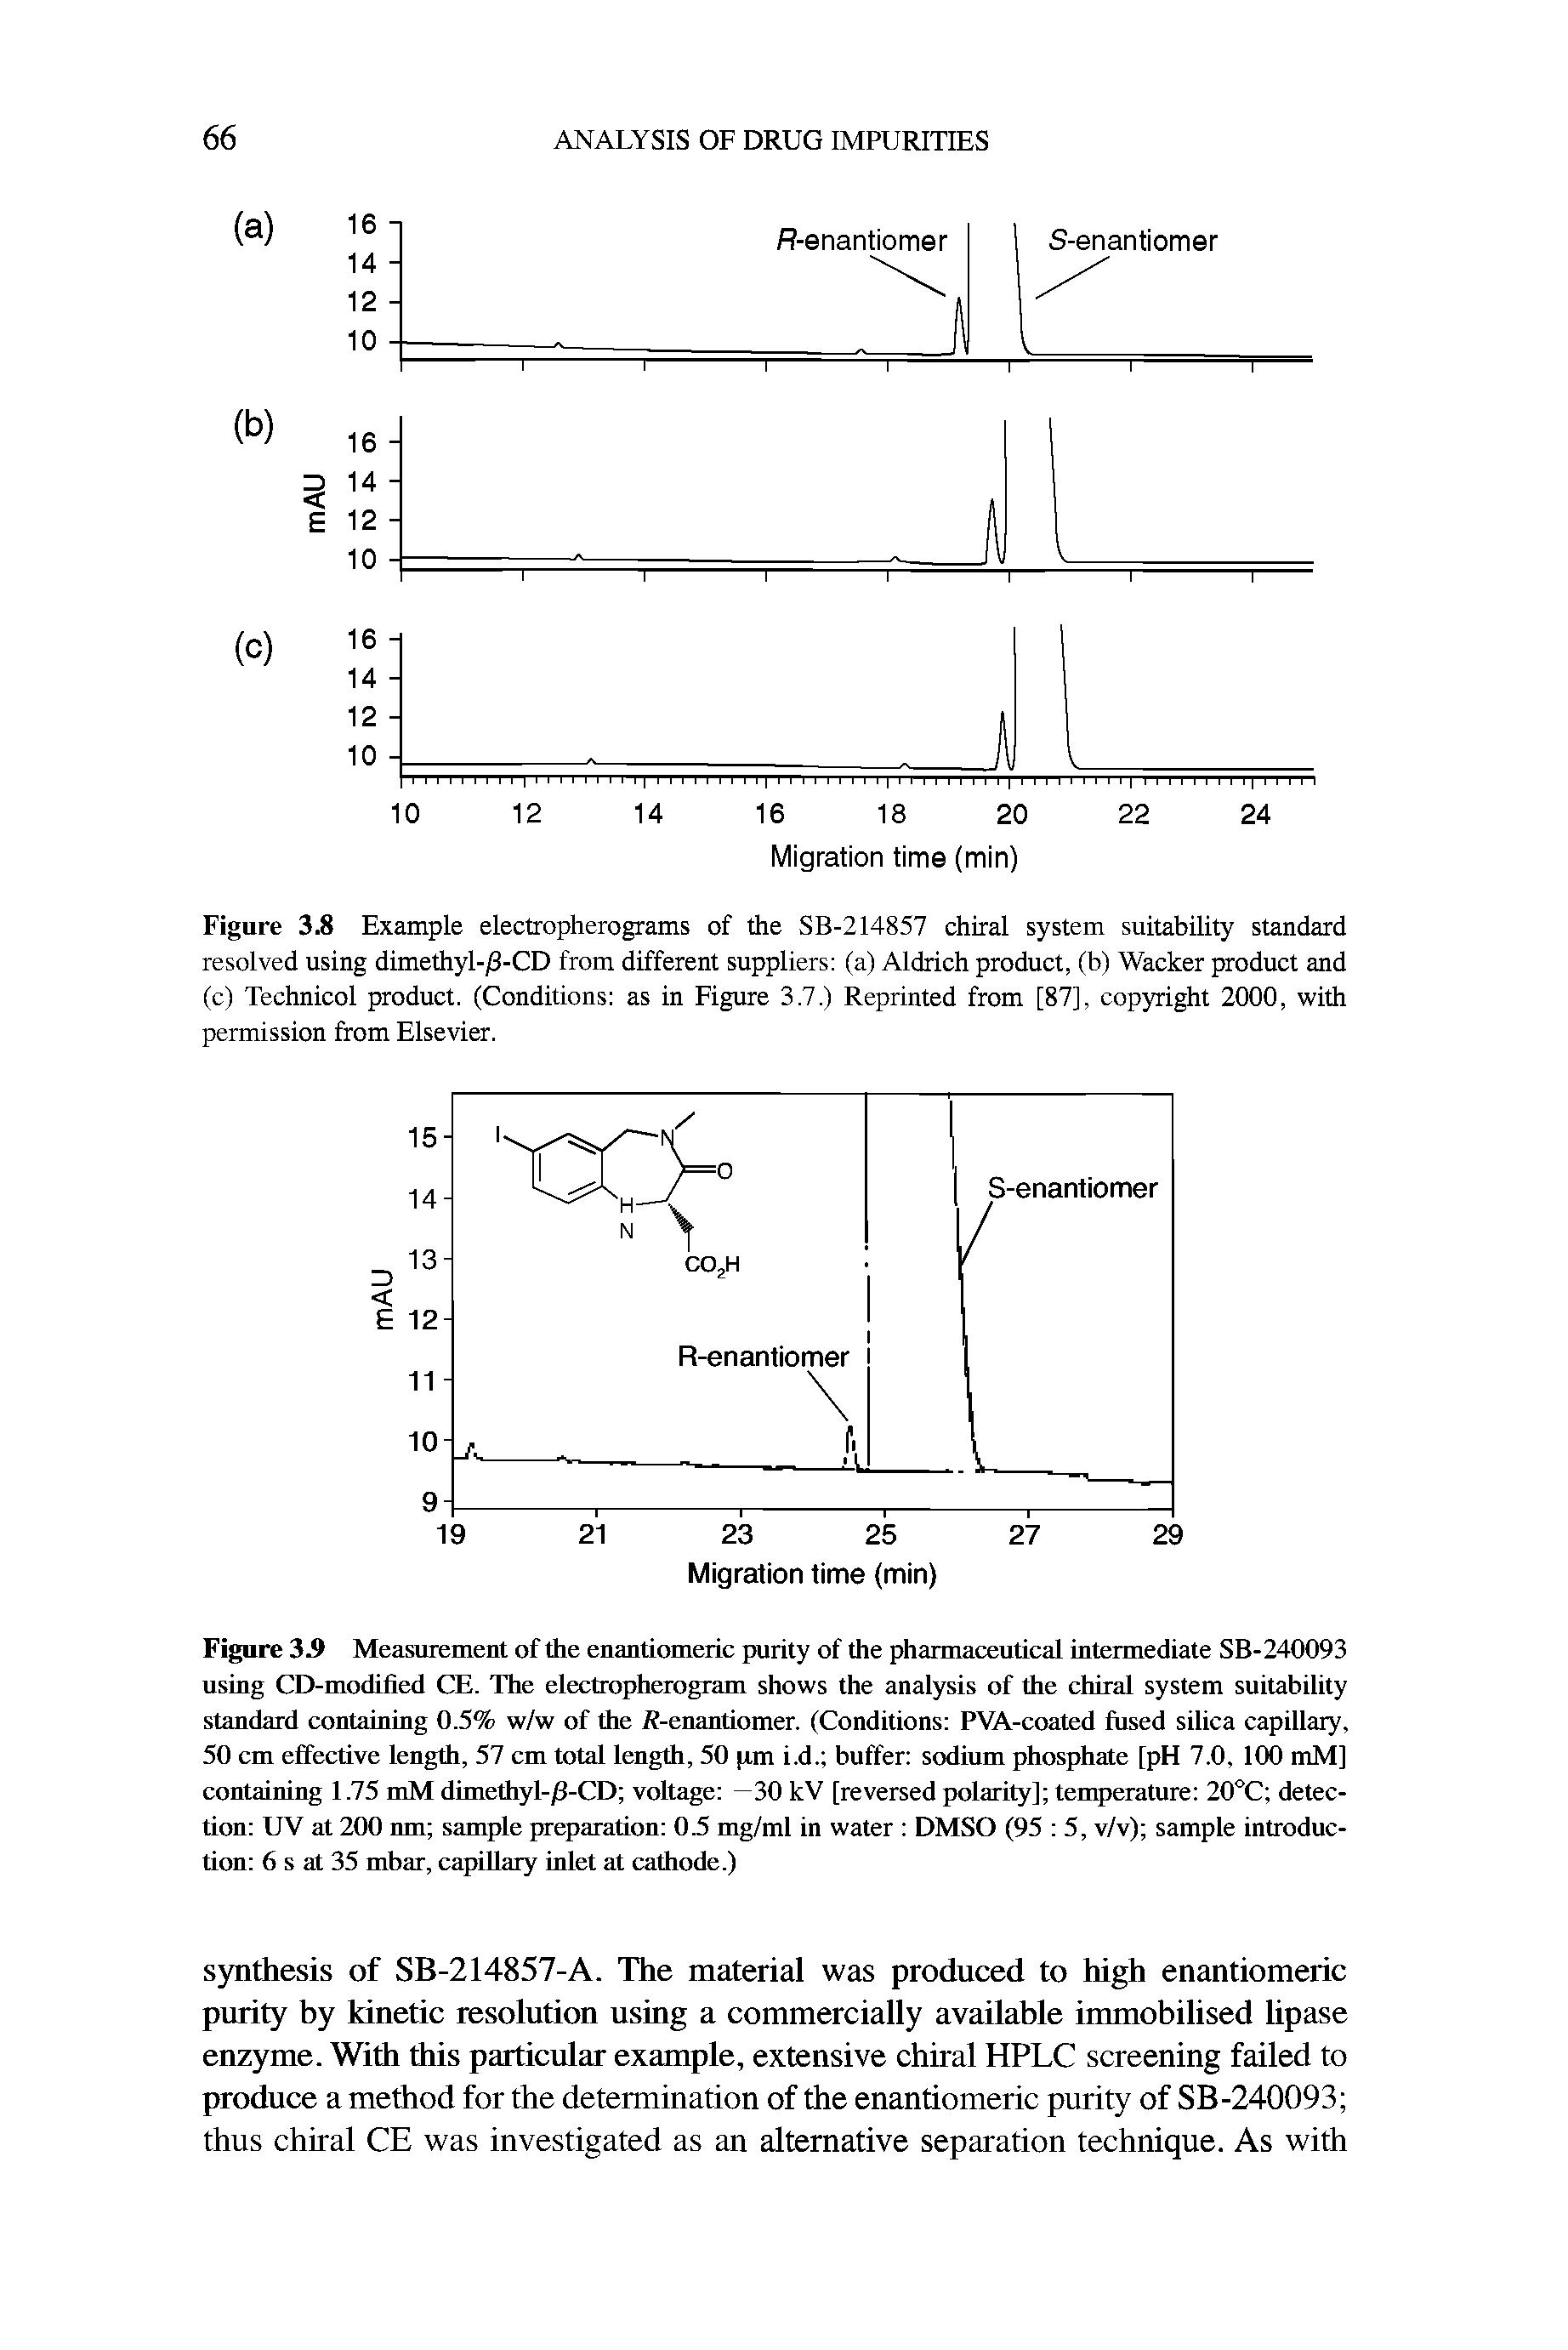 Figure 3.9 Measurement of the enantiomeric purity of the pharmaceutical intermediate SB-240093 using CD-modified CE. The electropherogram shows the analysis of the chiral system suitability standard containing 0.5% w/w of the R-enantiomer. (Conditions PVA-coated fused silica capillary, 50 cm effective length, 57 cm total length, 50 pm i.d. buffer sodium phosphate [pH 7.0, 100 mM] containing 1.75 mM dimethyl-/l-CD voltage —30 kV [reversed polarity] temperature 20°C detection UV at 200 nm sample preparation 0.5 mg/ml in water DMSO (95 5, v/v) sample introduction 6 s at 35 mbar, capillary inlet at cathode.)...